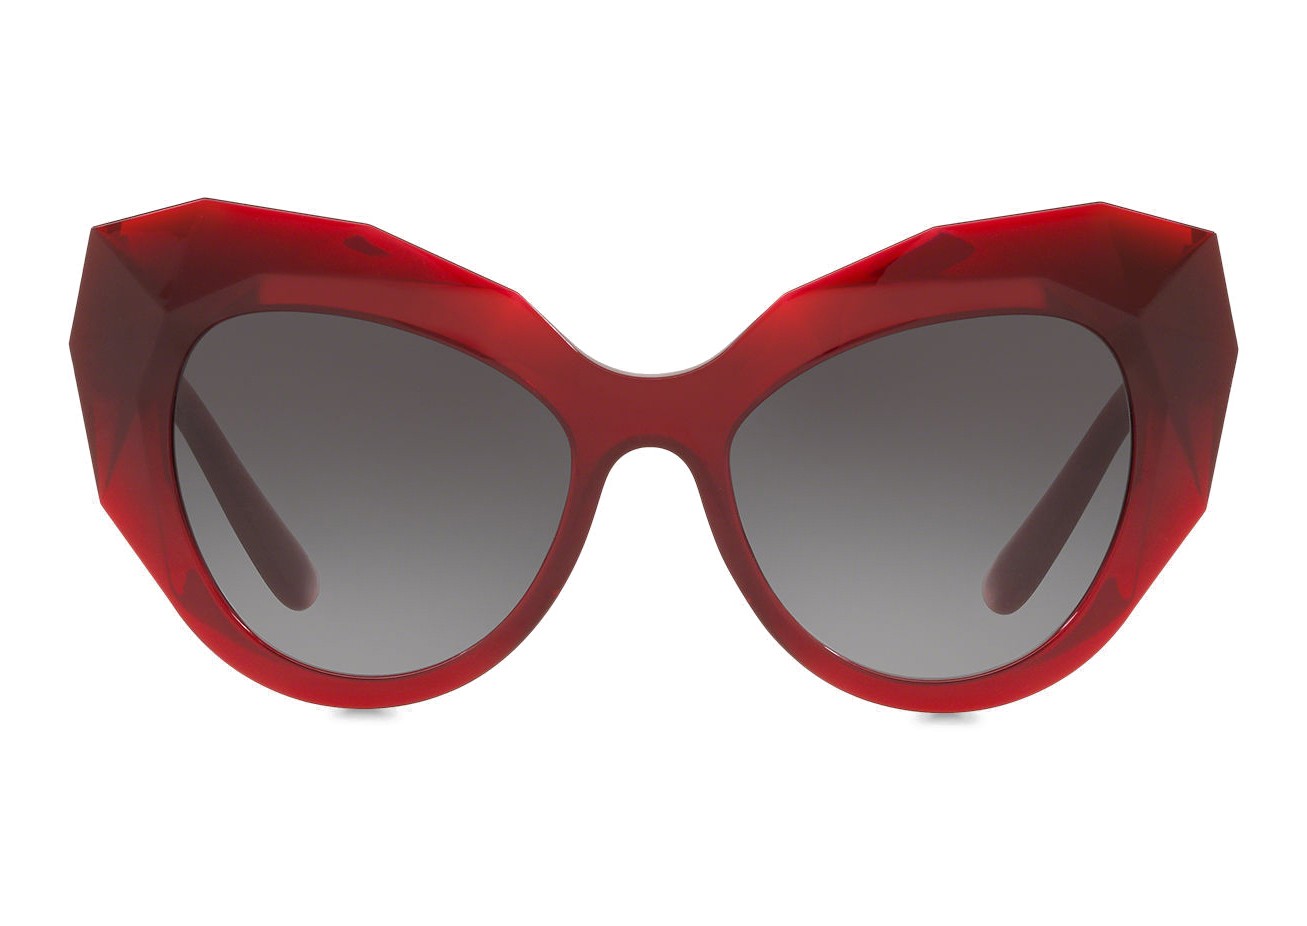 dolce and gabbana red cat eye glasses